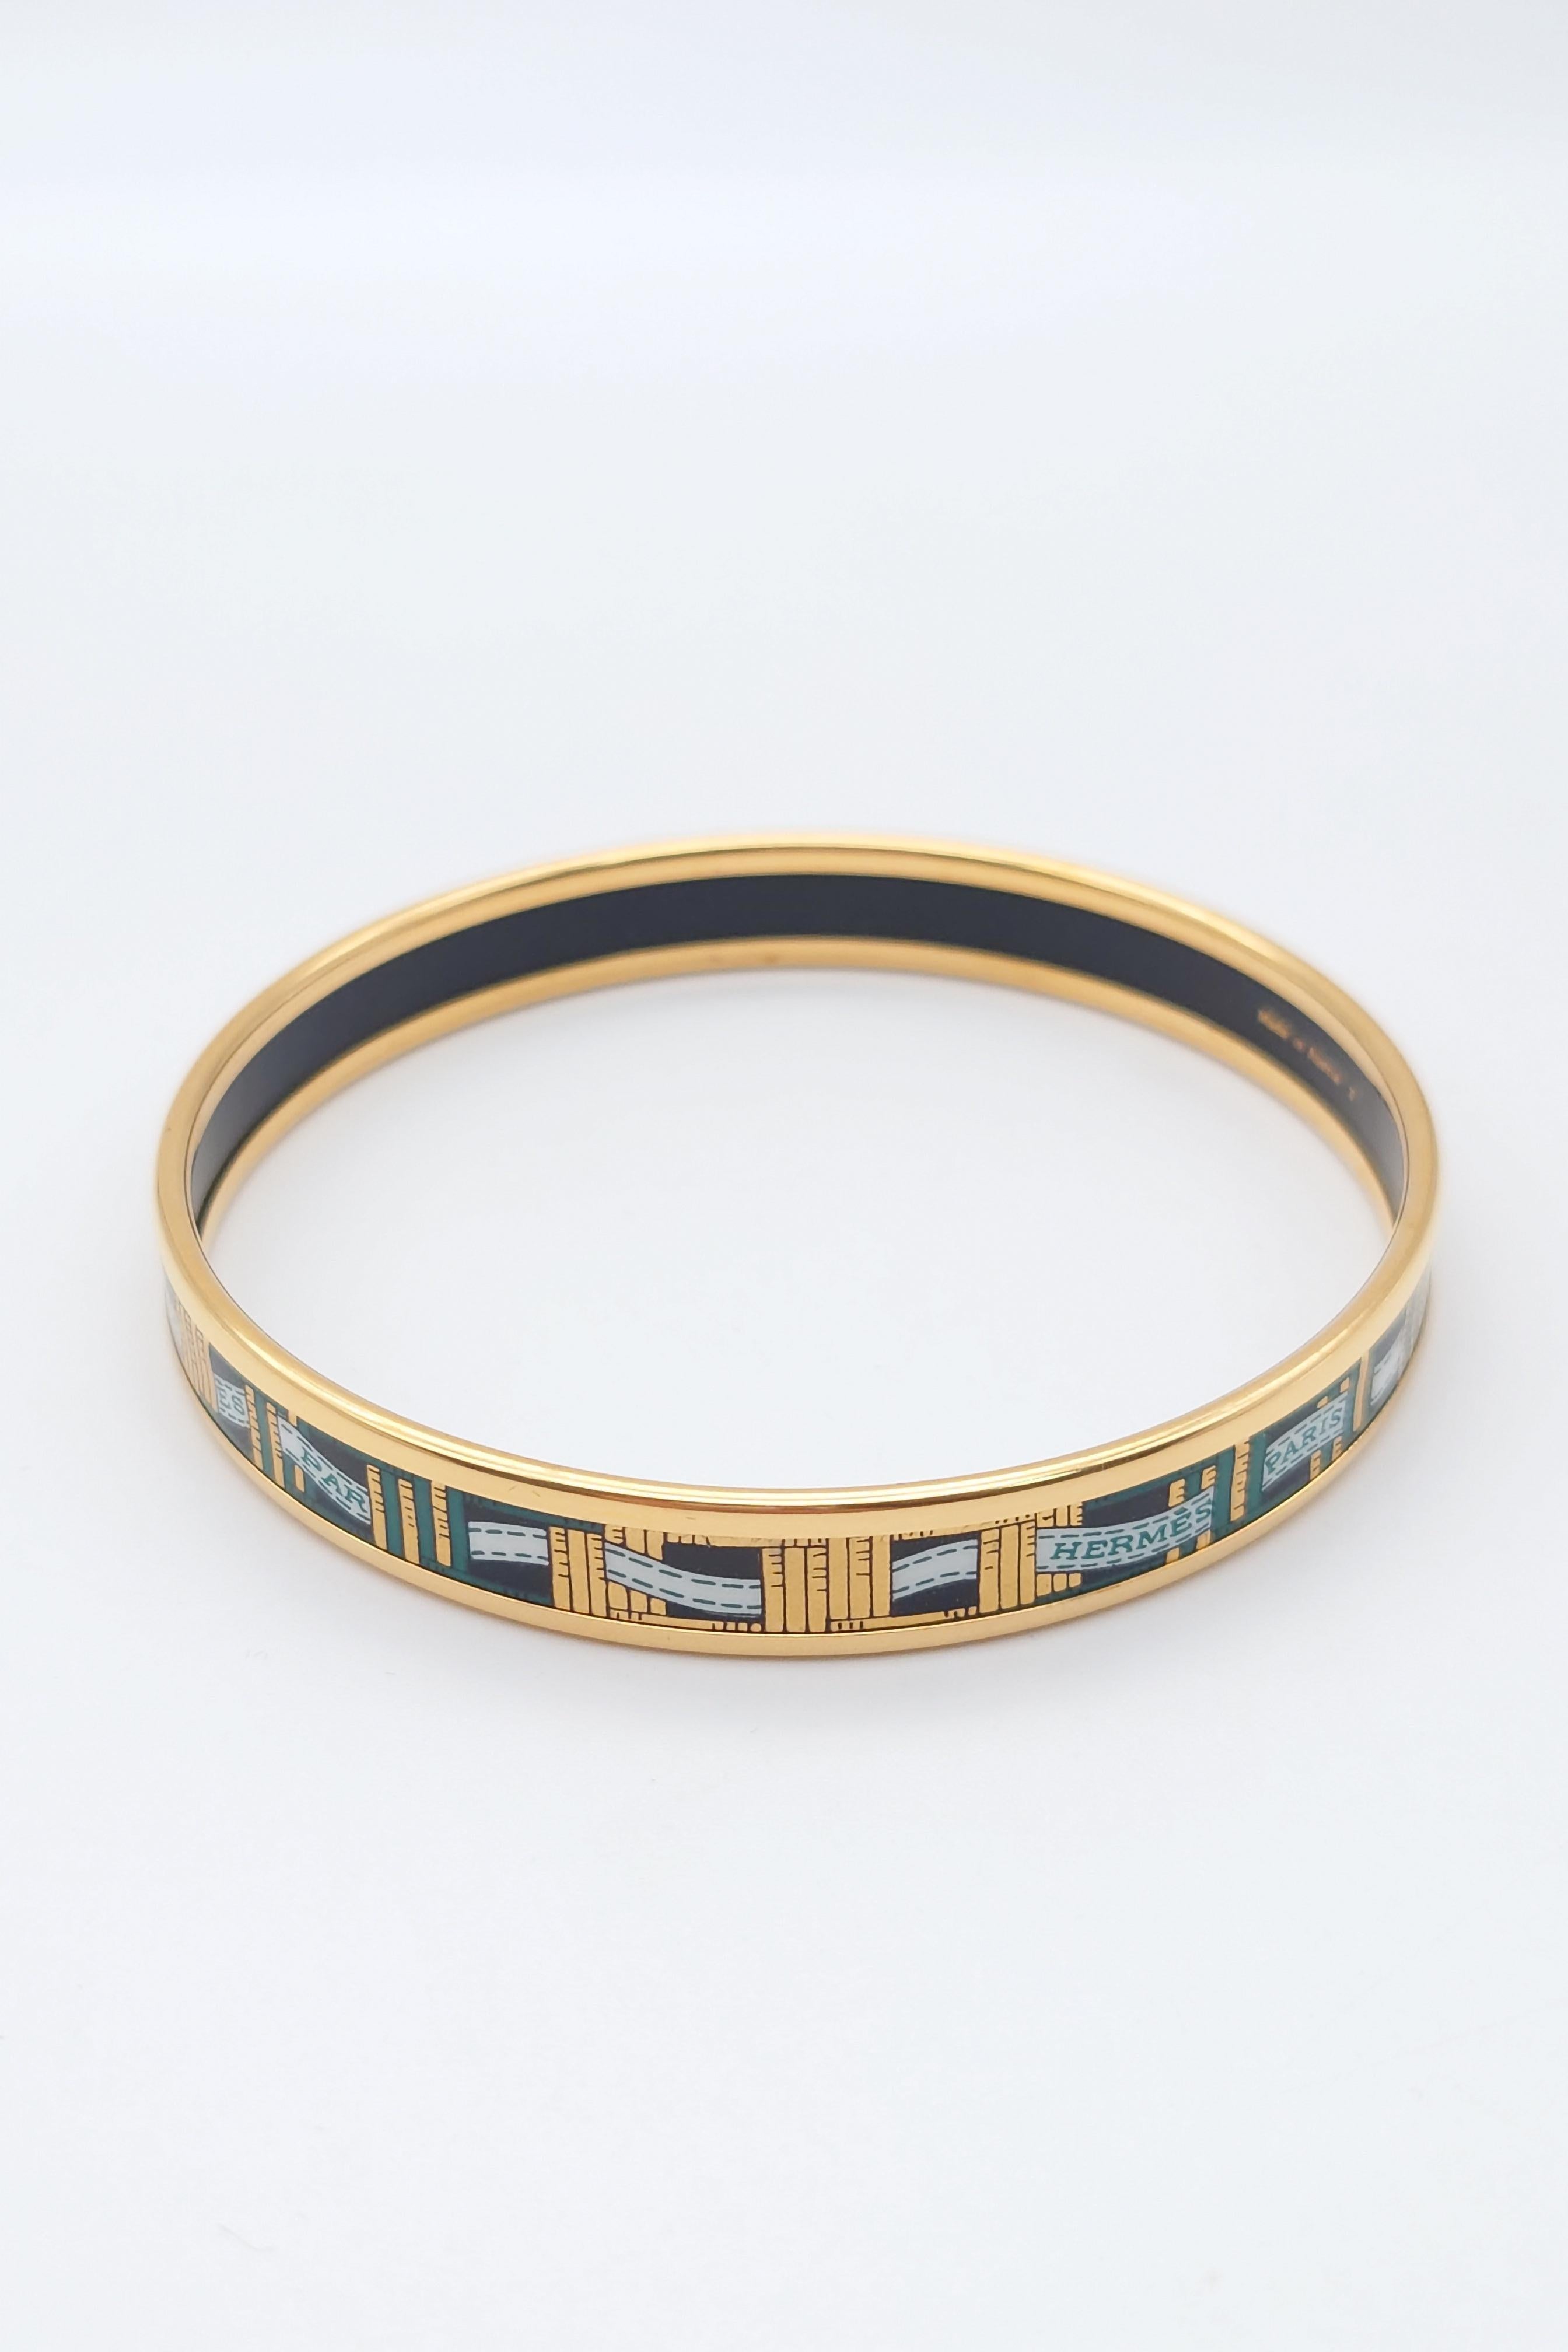 Preowned

Authentic Hermes Bracelet Vintage Enamel Bangle”Band”

Height:9.0mm
Width:68.0mm
Material:Enamel × Metal
Marked:HERMES
Weight:20.88g

Come With:Box

Condition:Good Condition

Please note that vintage items are not new and therefore usually